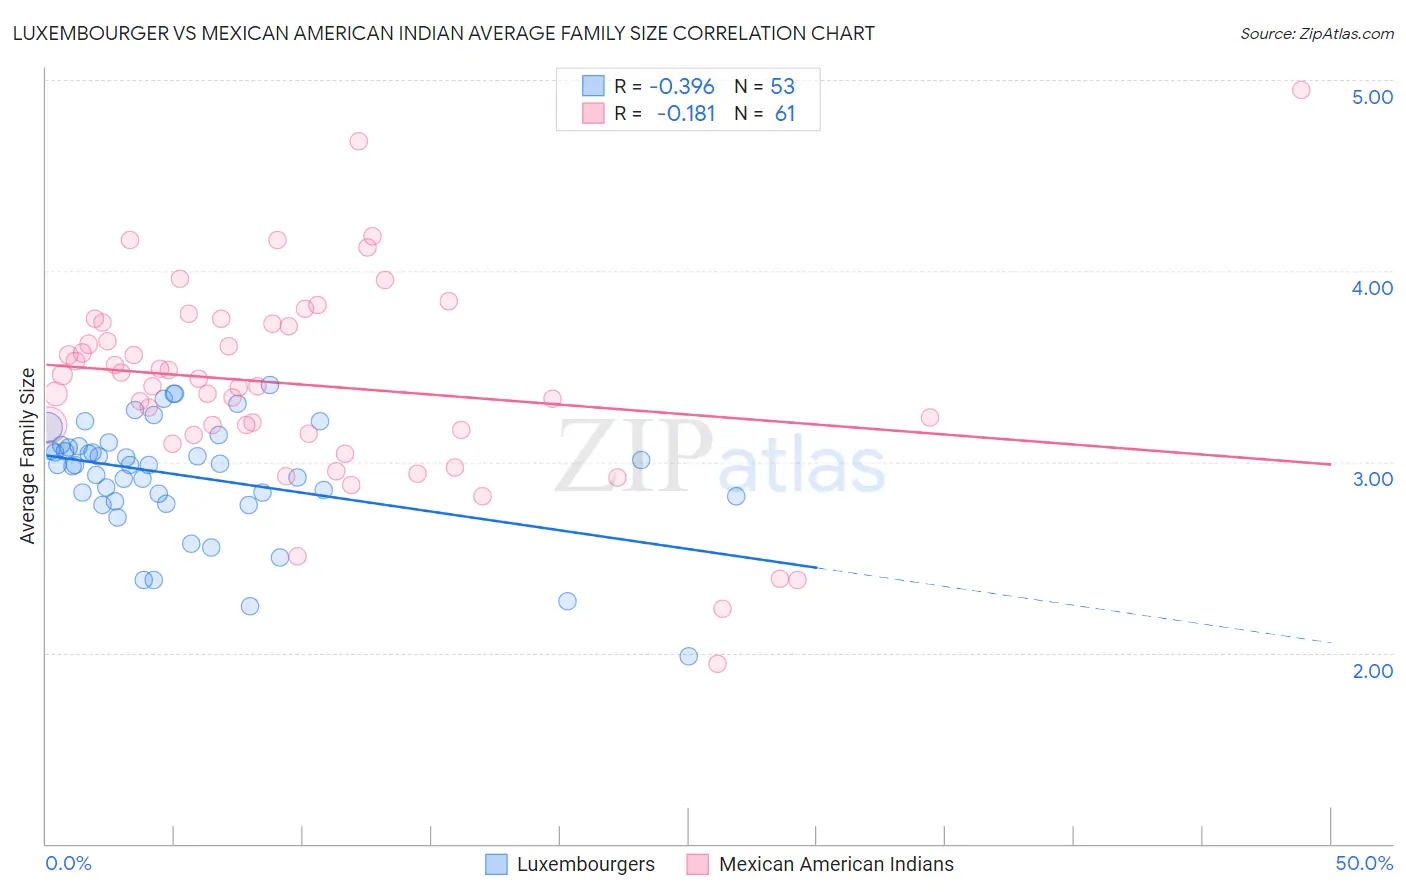 Luxembourger vs Mexican American Indian Average Family Size